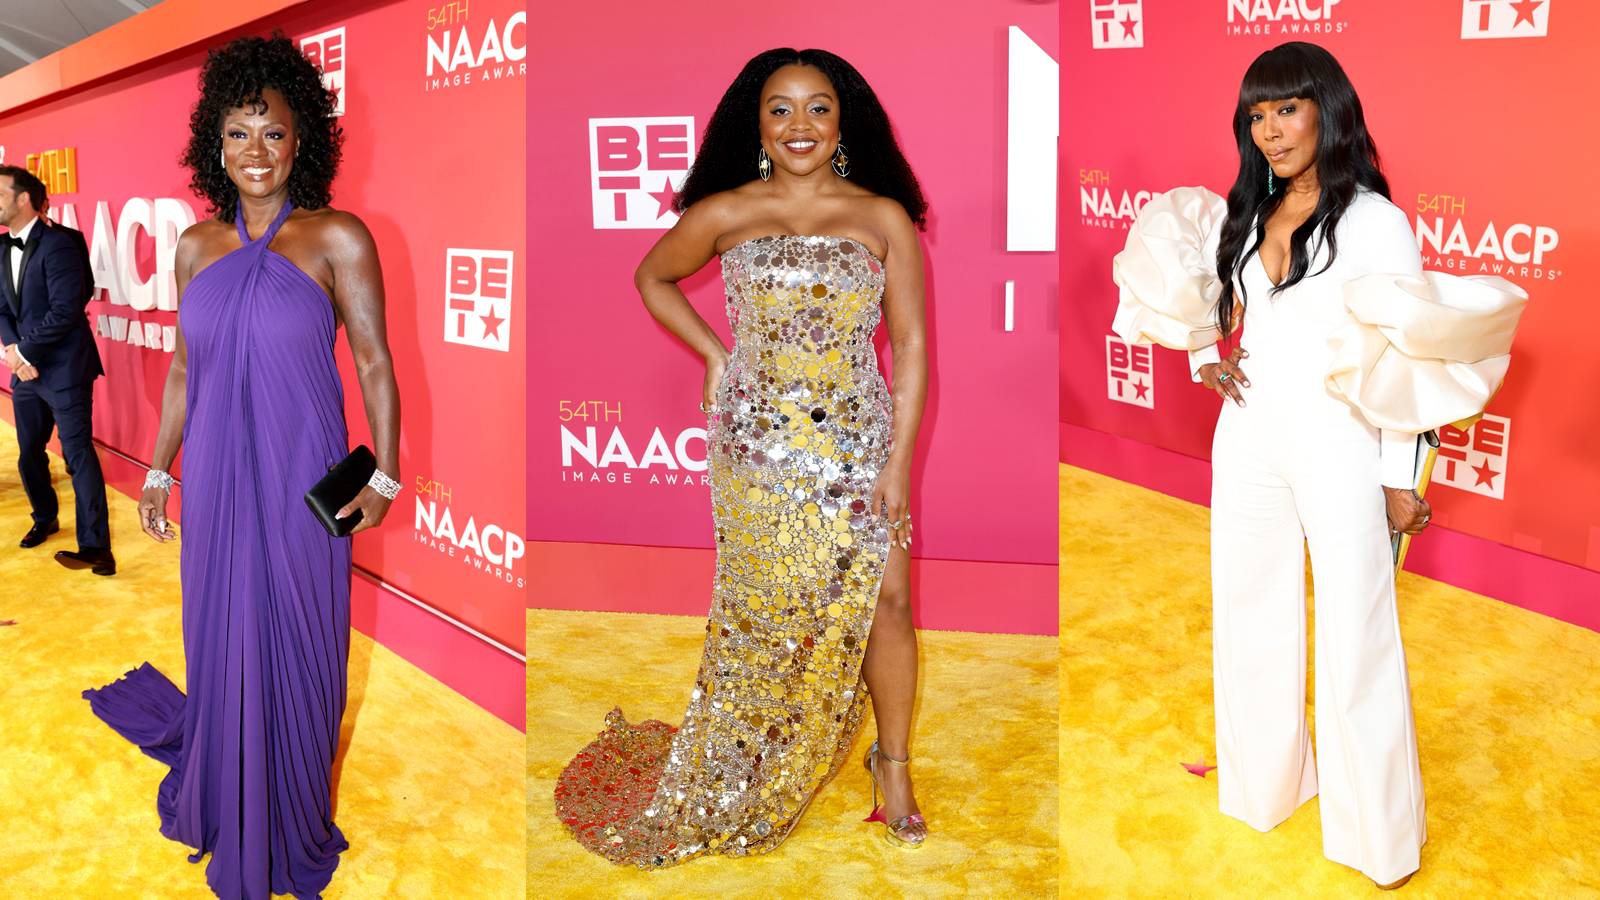 The carpet at the Image 1 from 2023 NAACP Image Awards Ladies First